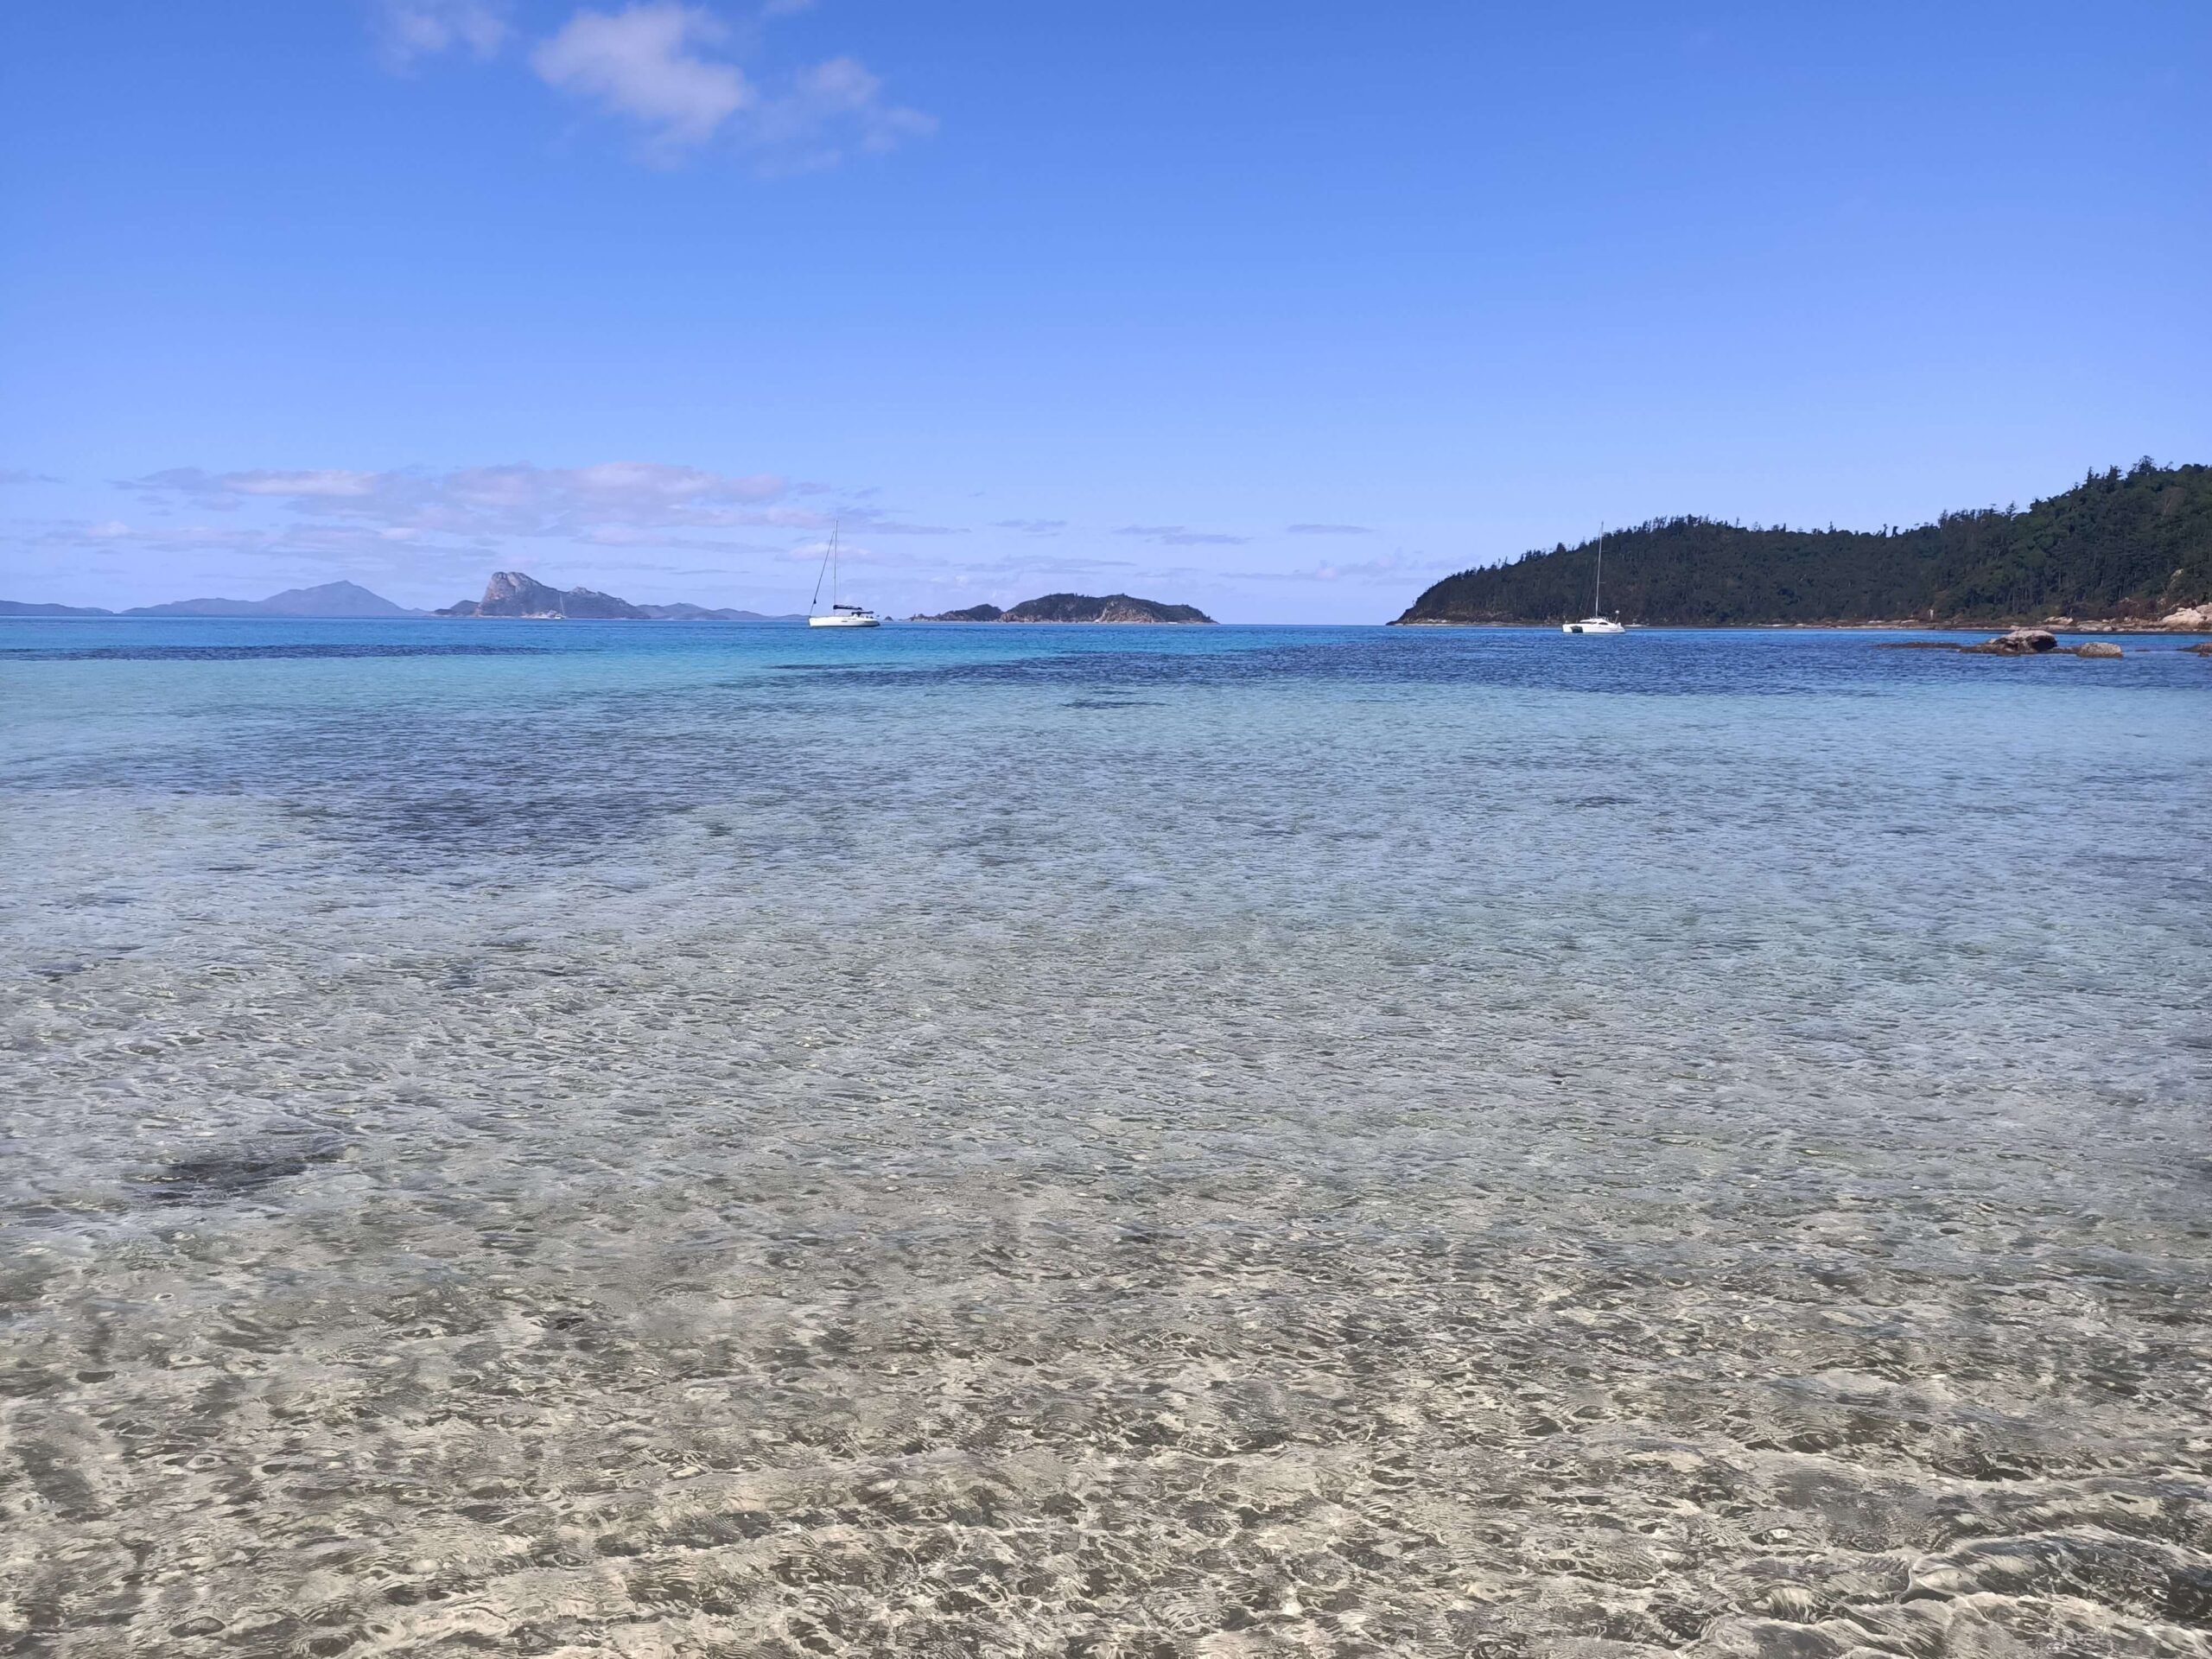 The crystal clear waters of Turtle Bay (Whitsunday Island).